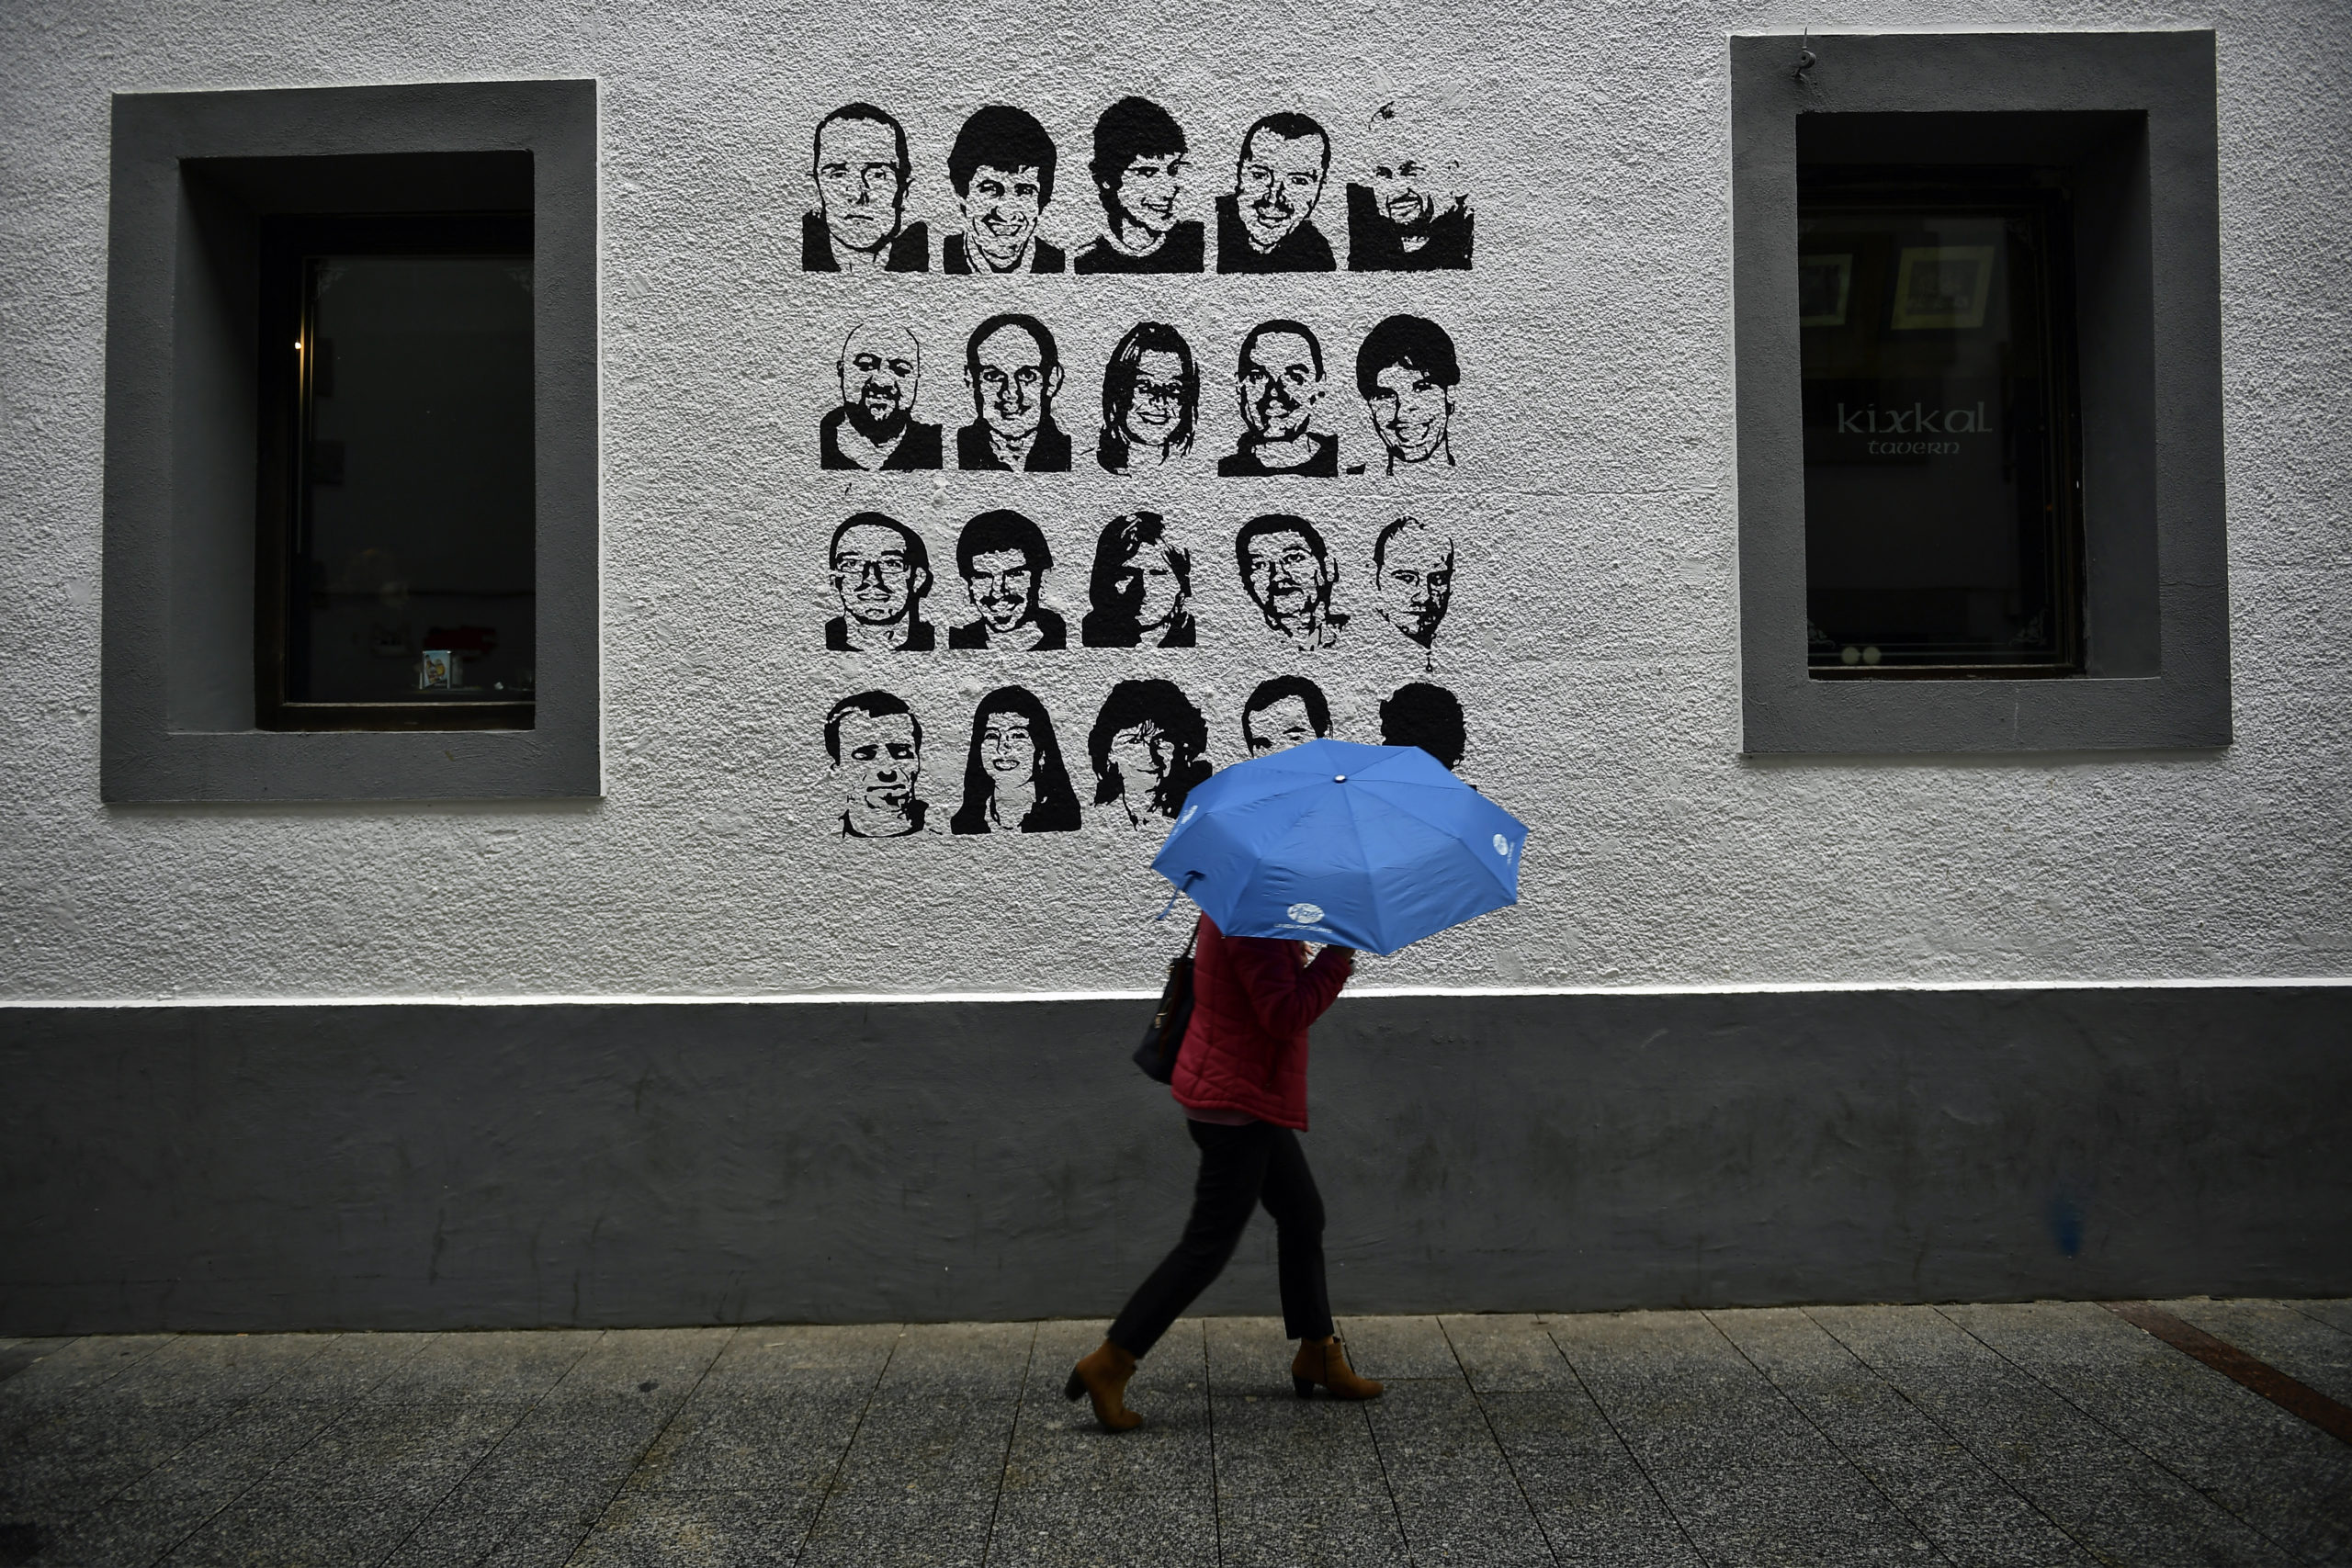 A woman shelters from the rain under an umbrella, while walking past a wall painted with portraits of prisoners of the Basque separatist armed group ETA, in the small village of Hernani, Spain, on May 2, 2018.